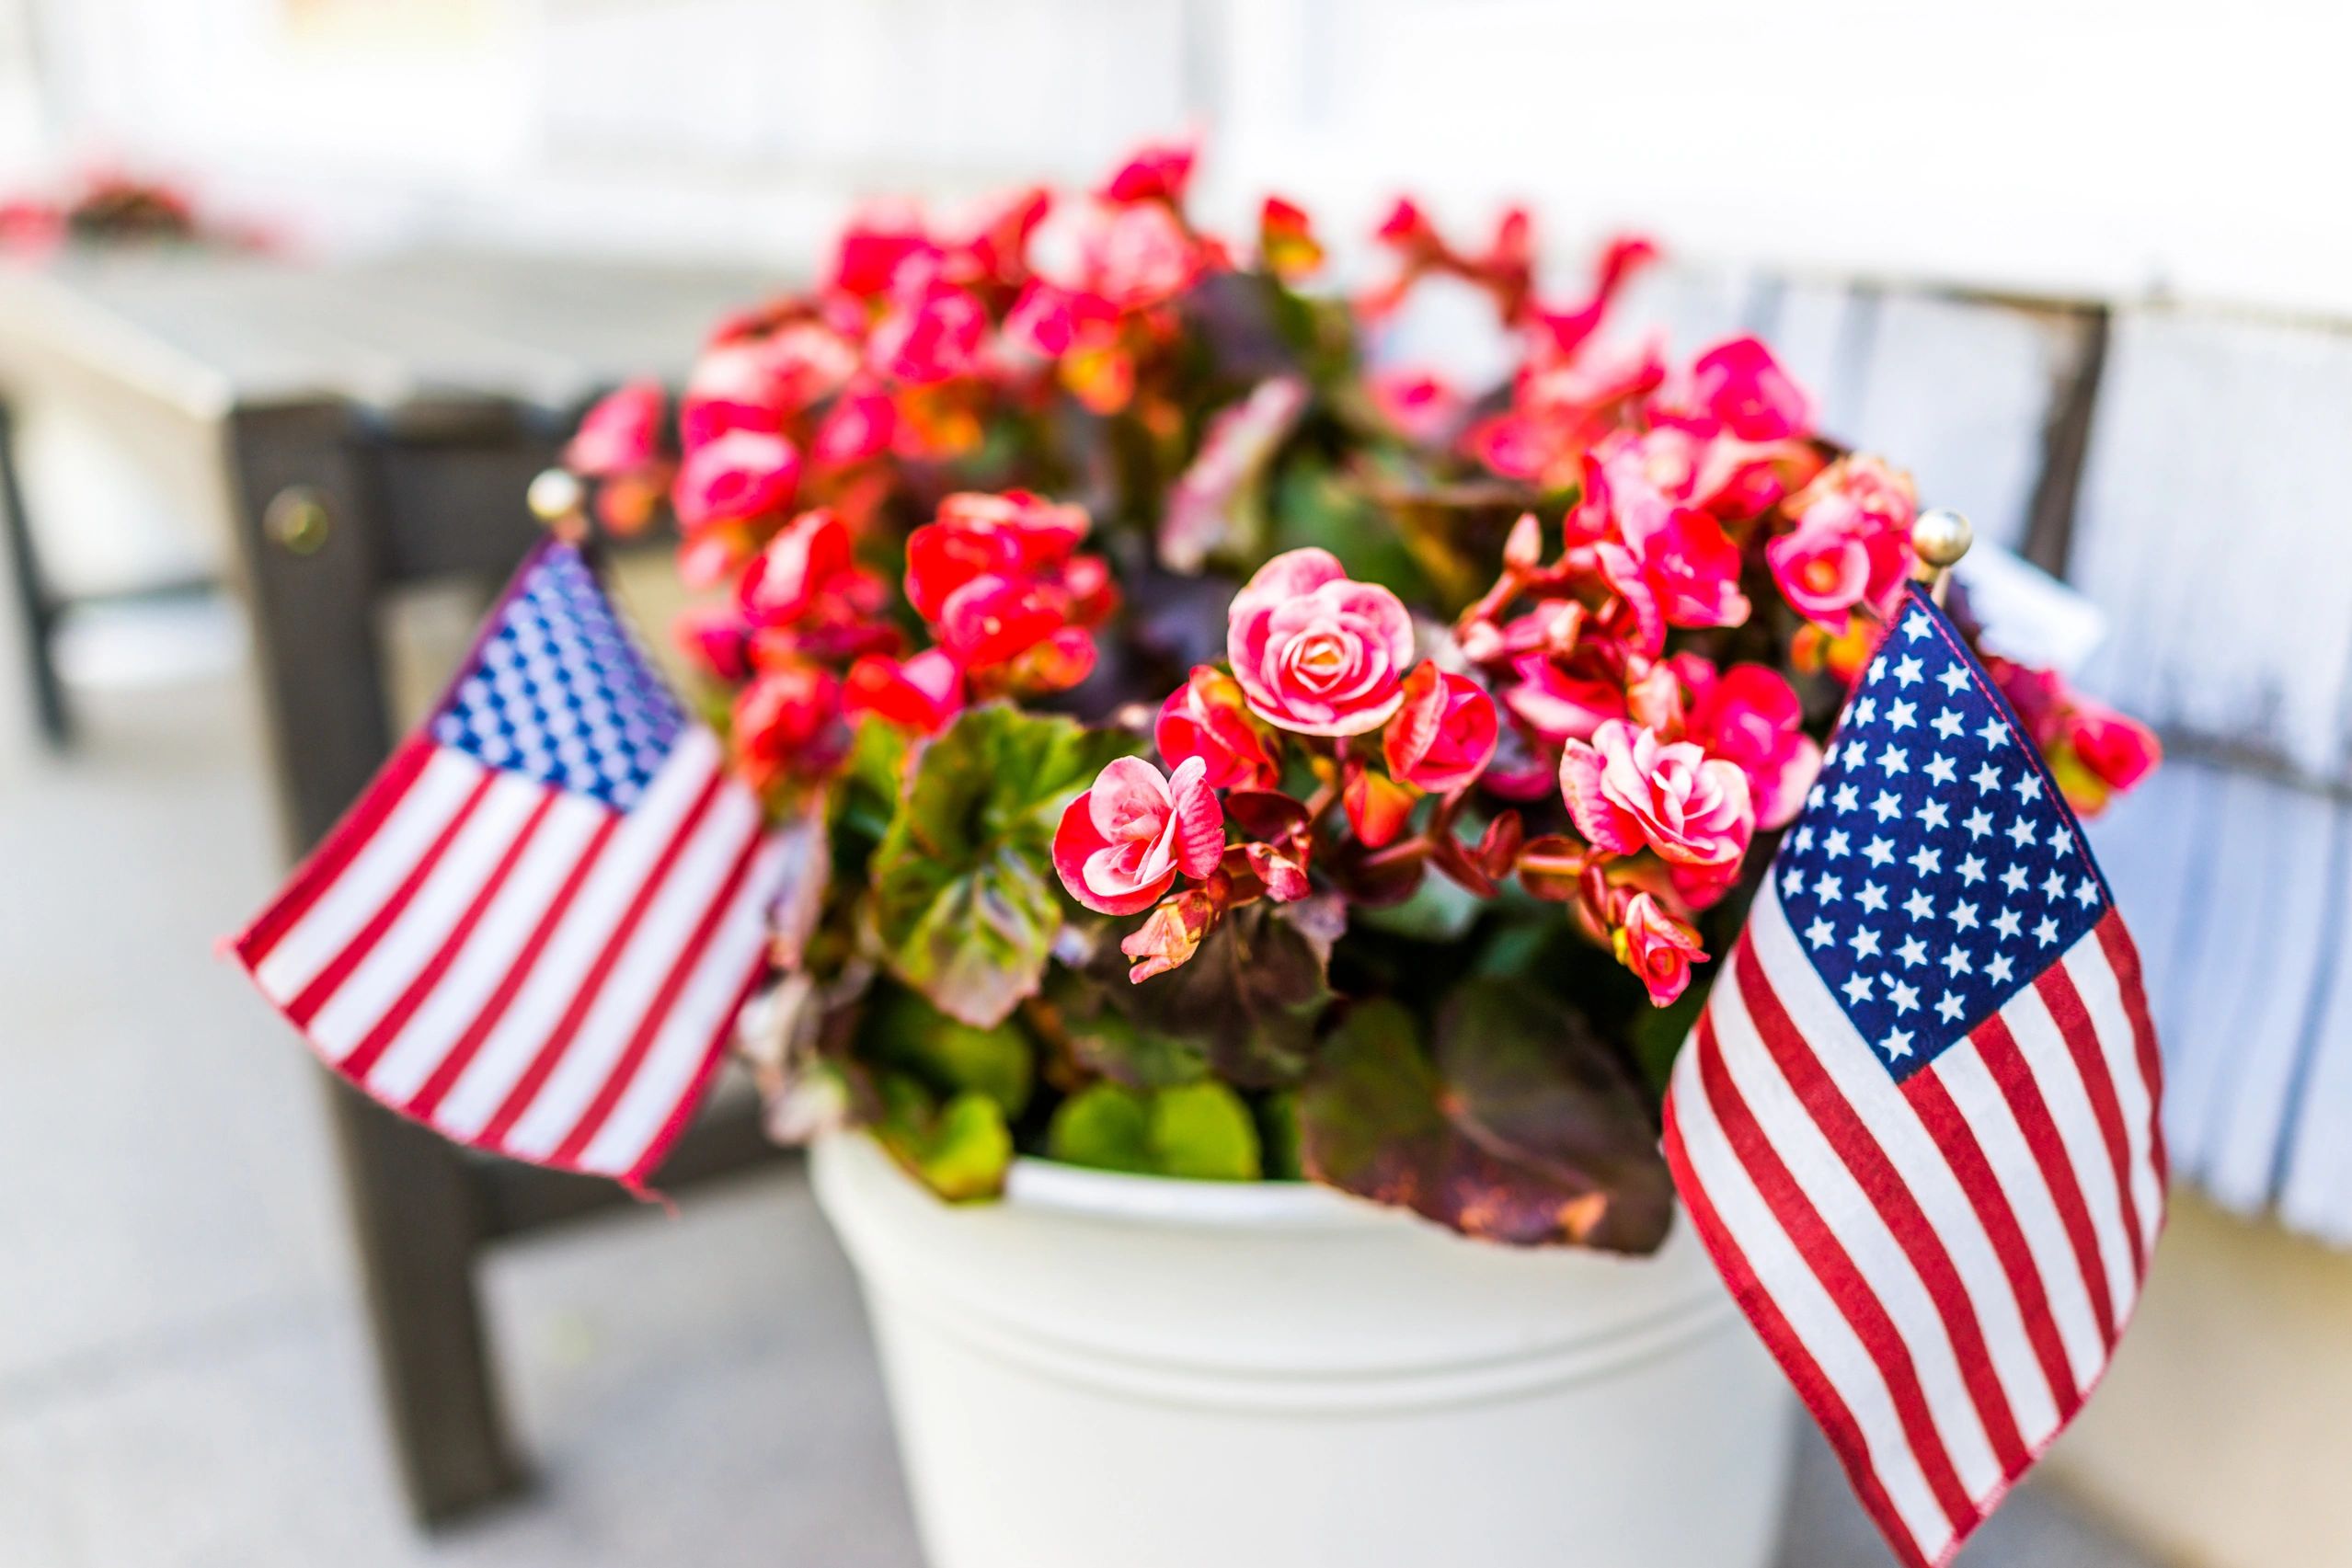 White flower pot with red flowers and two American flags.